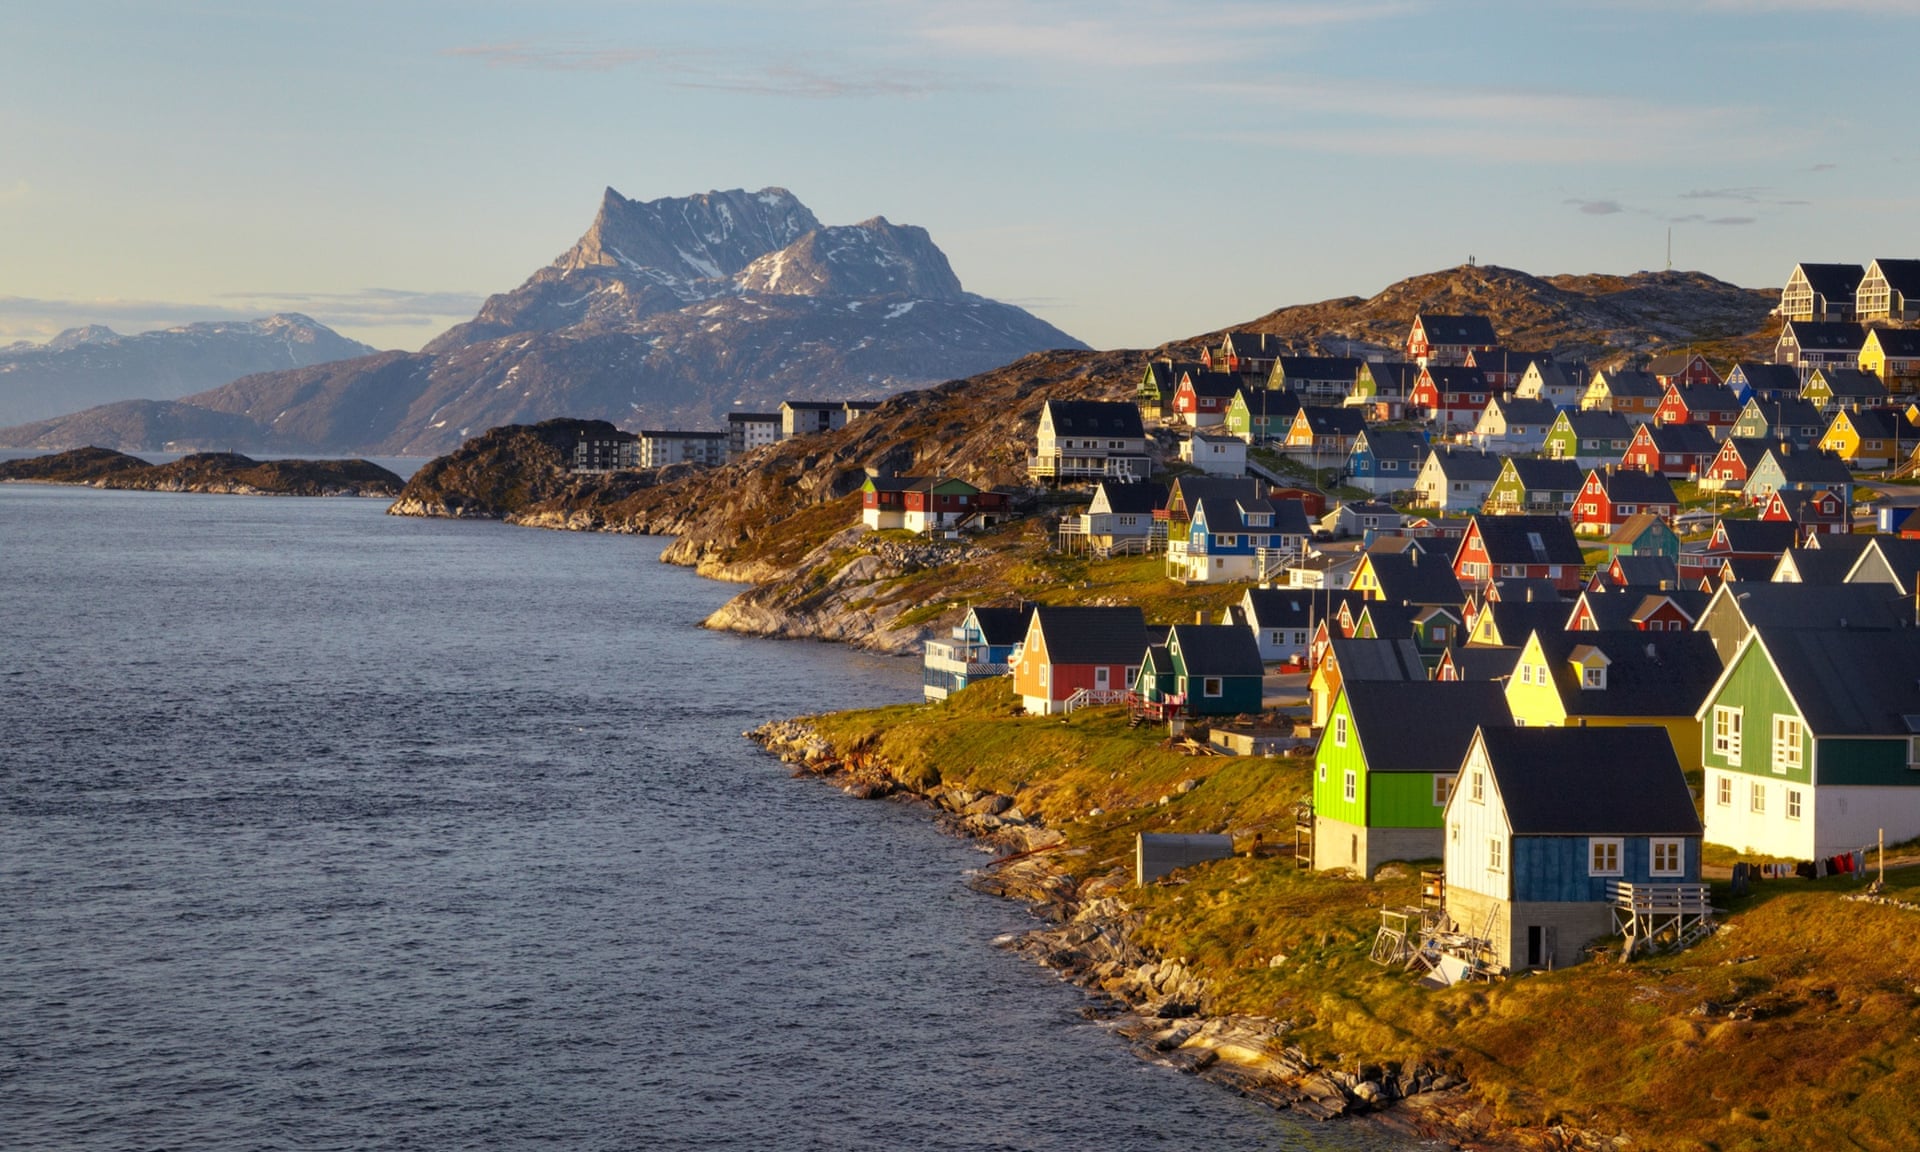 The village of Nuuk, Greenland, the world's most northerly capital